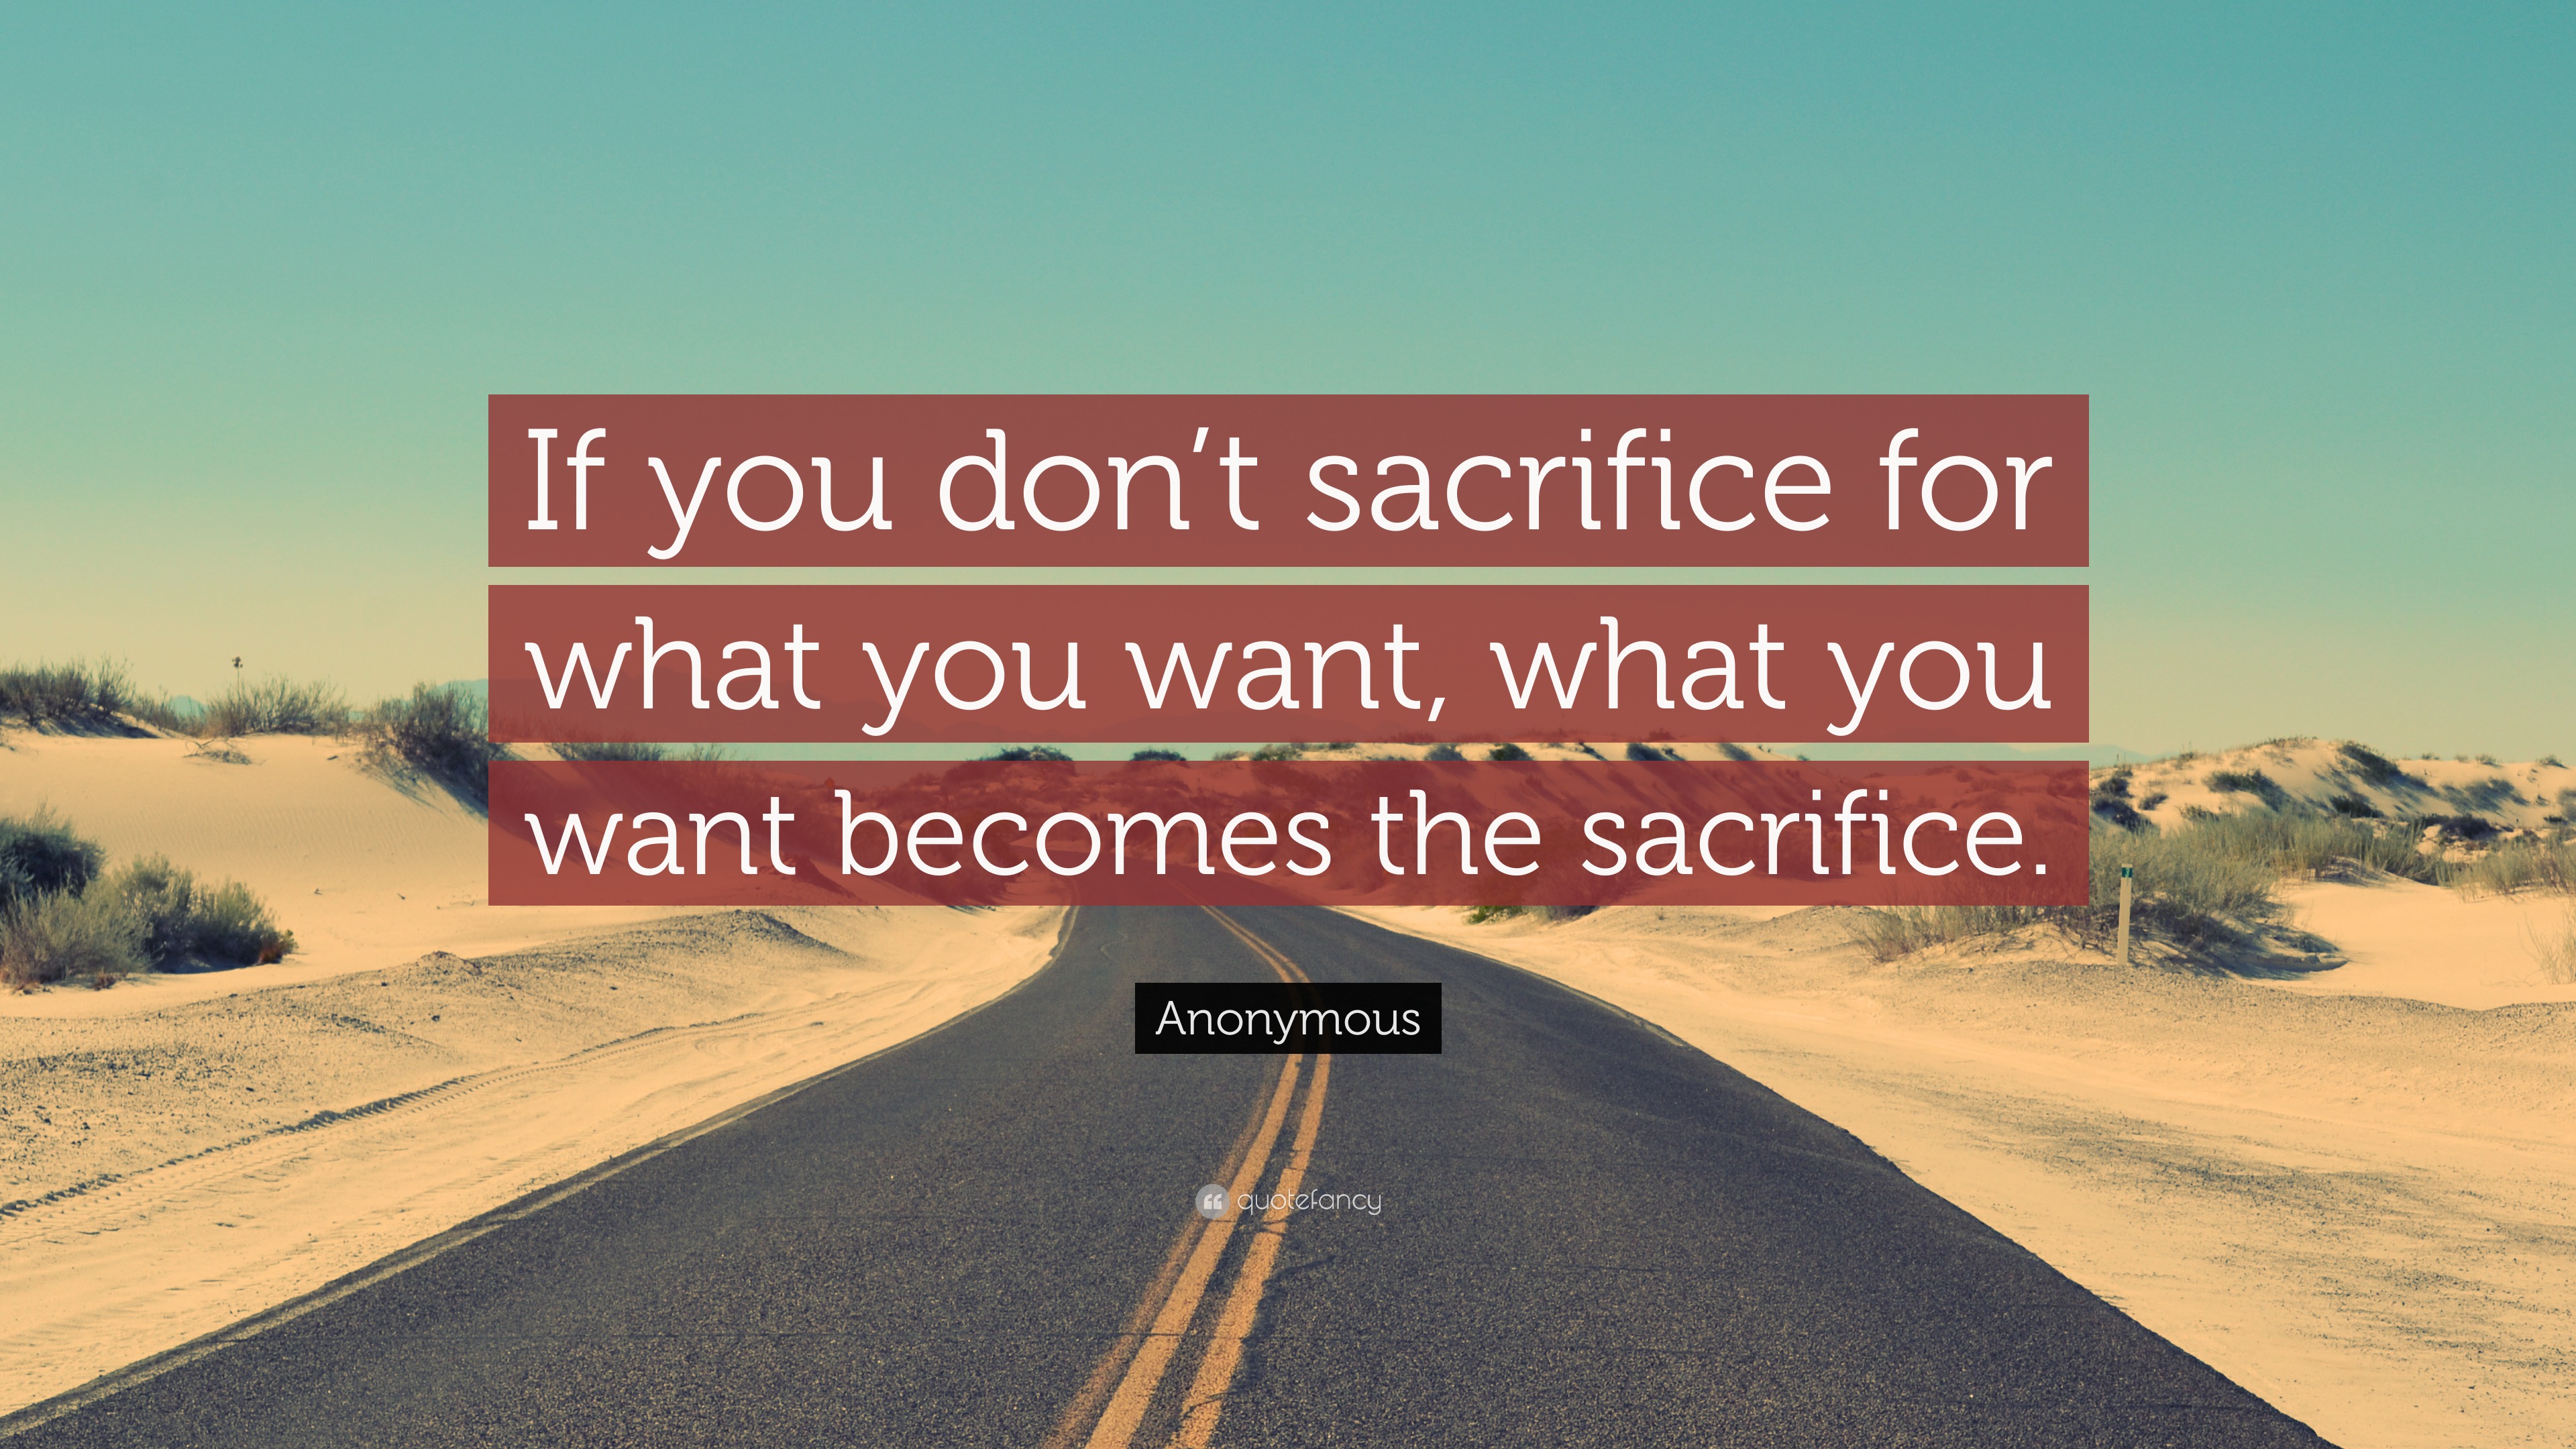 Anonymous Quote: “If you don't sacrifice for what you want, what you want  becomes the